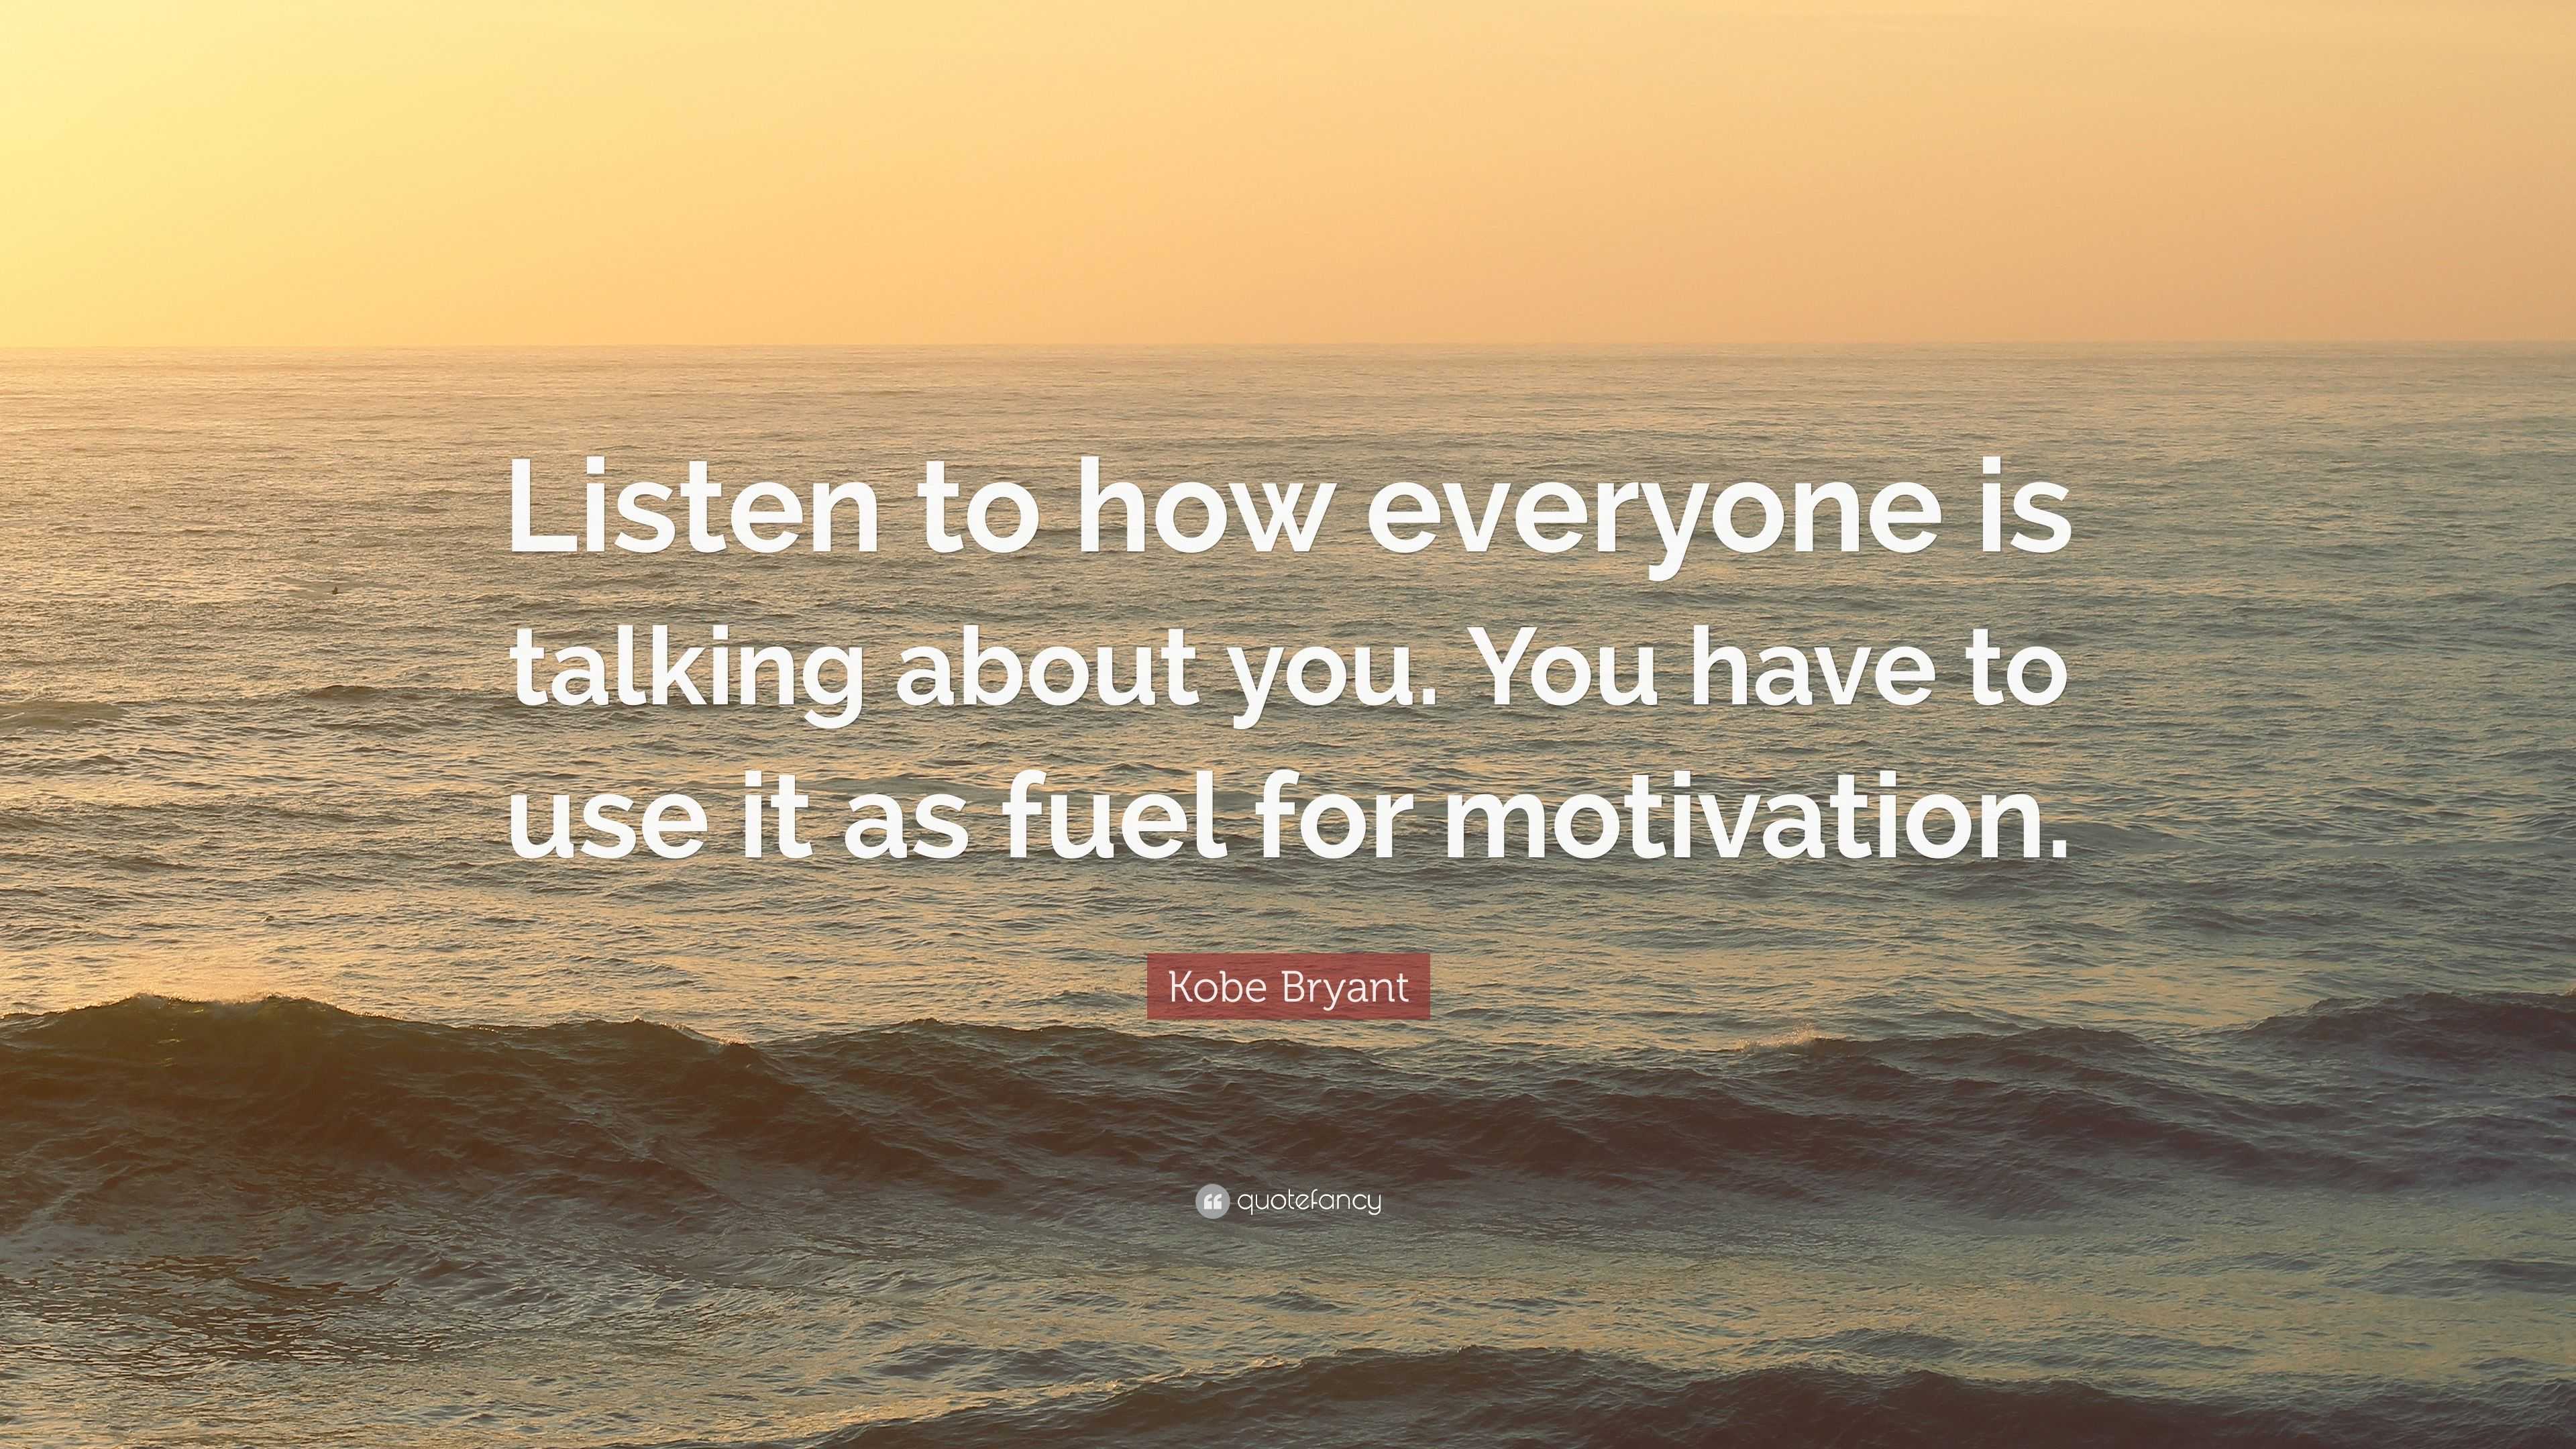 Kobe Bryant Quote: “Listen to how everyone is talking about you. You ...